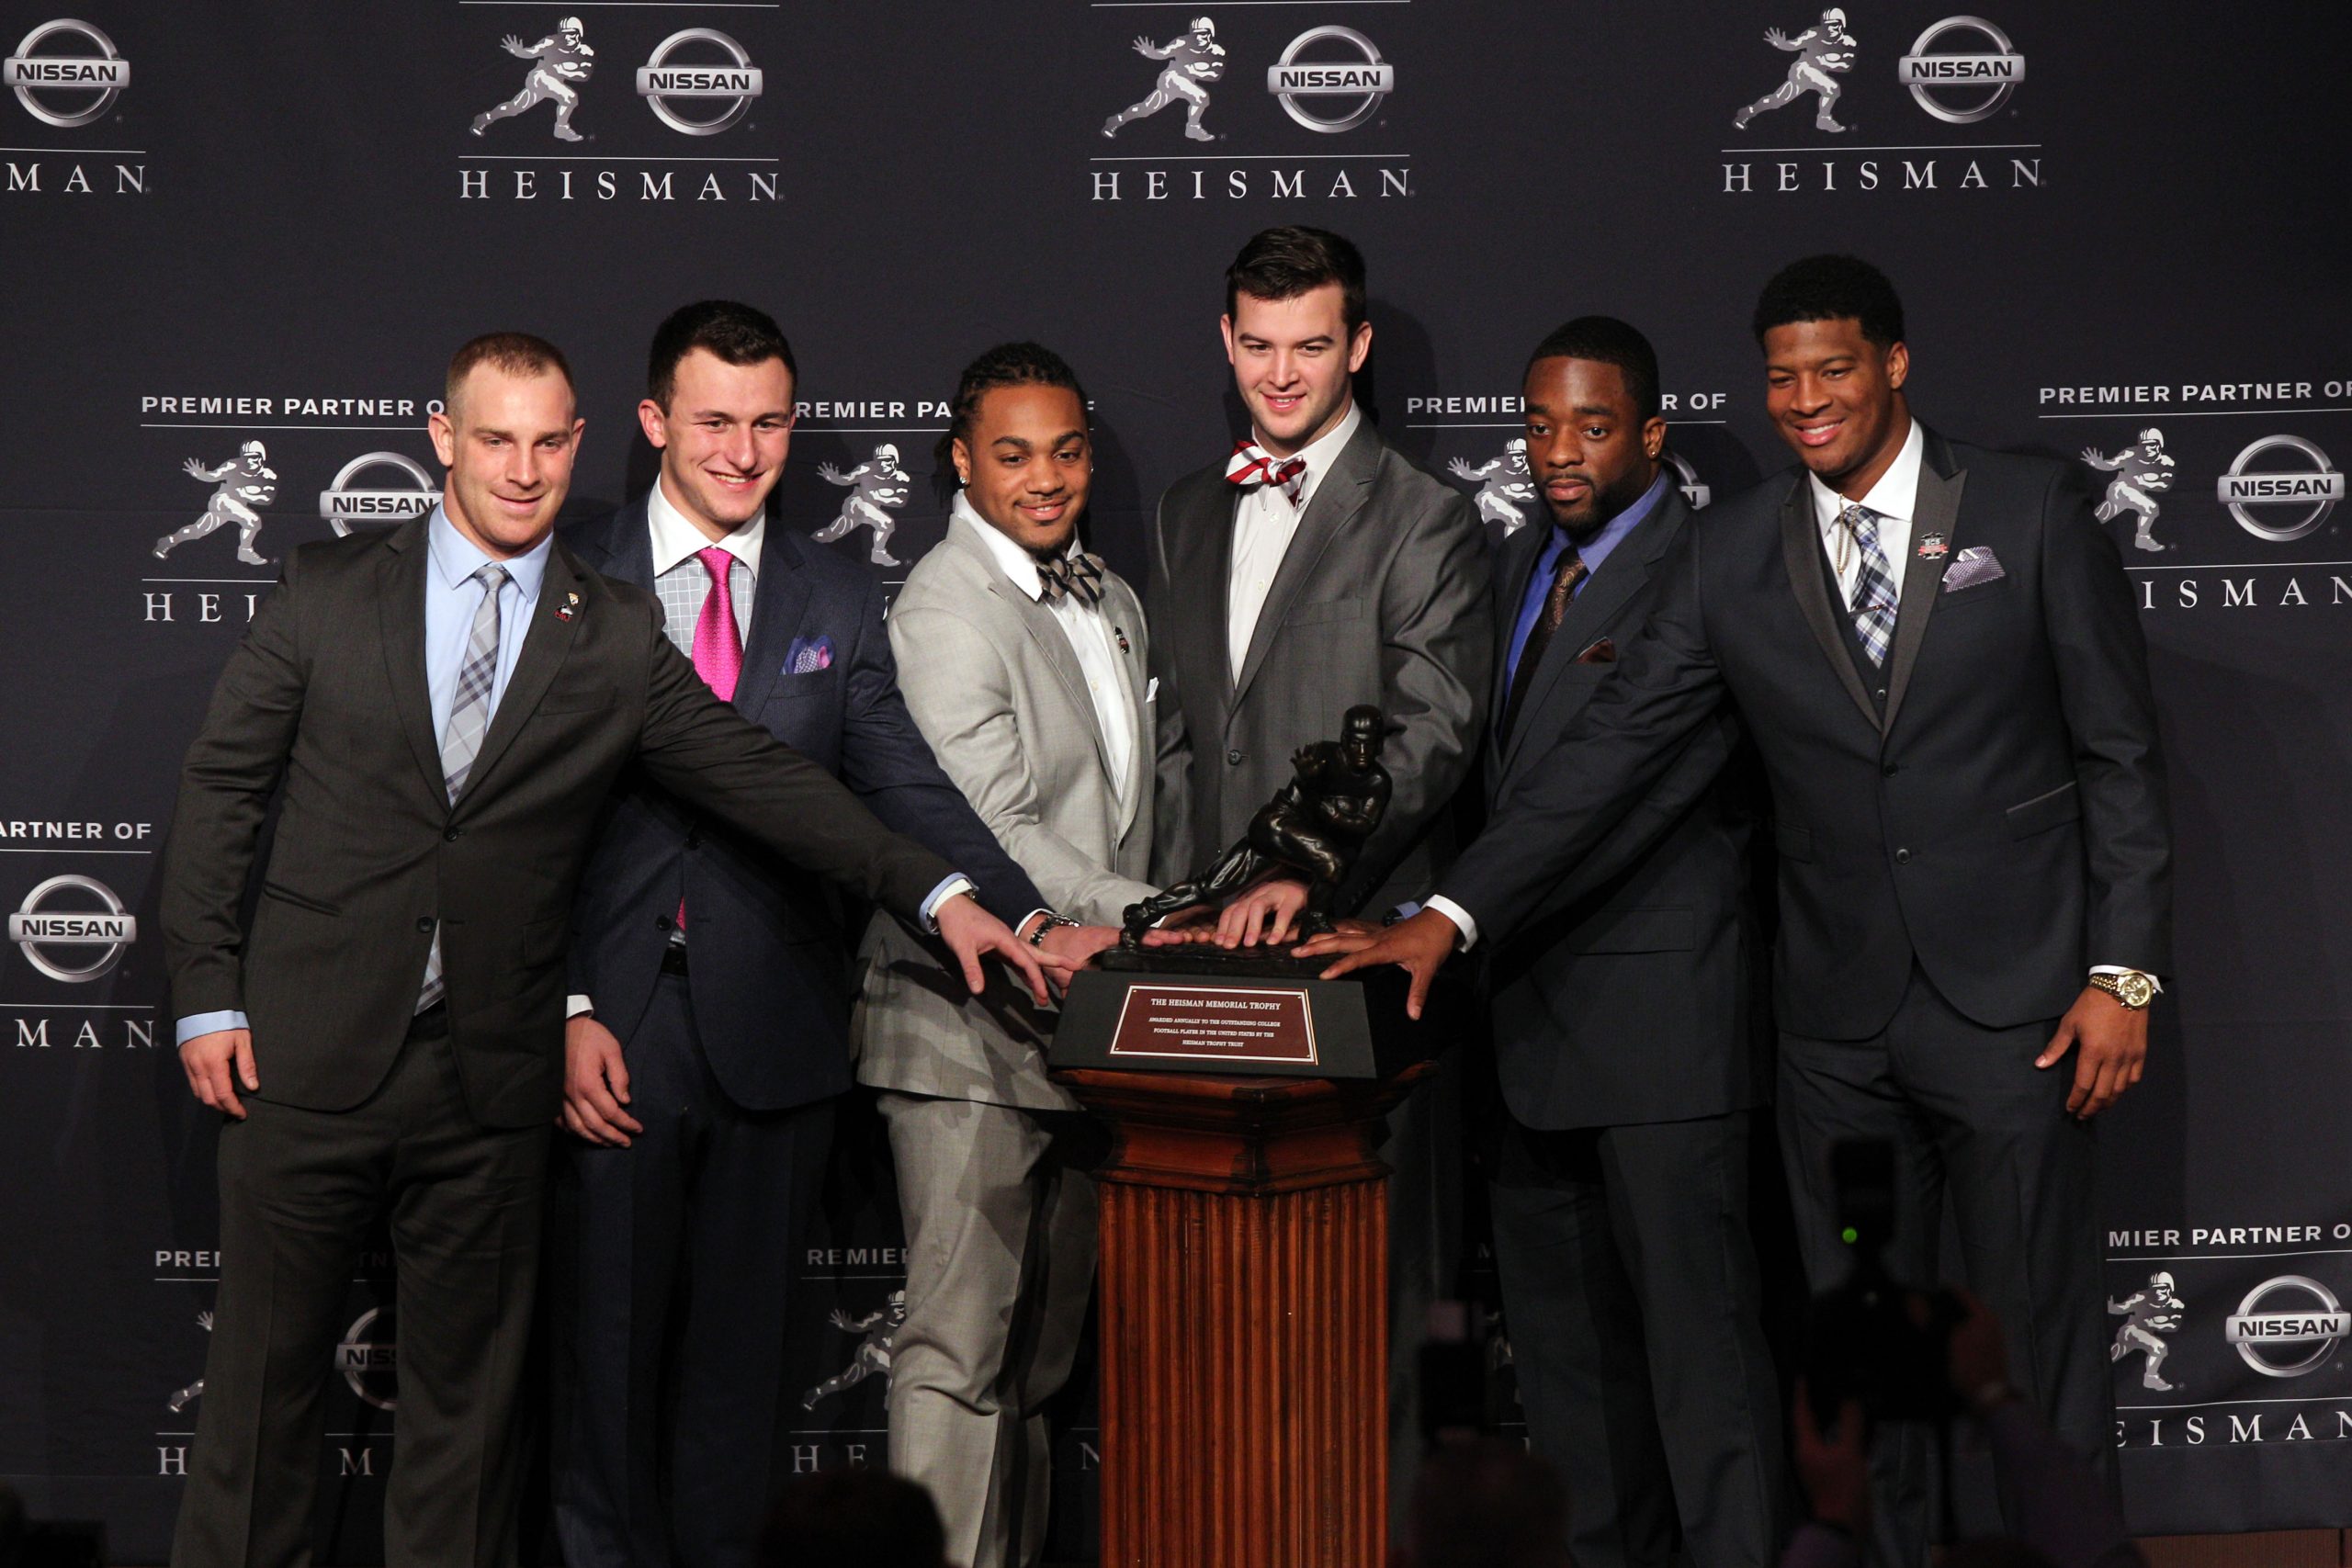 Dec 14, 2013; New York, NY, USA; (From left to right) Nothern Illinois Huskies quarterback Jordan Lynch, and Texas A&M Aggies quarterback Johnny Manziel, and Auburn Tigers running back Tre Mason, and Alabama Crimson Tide quarterback AJ McCarron, and Boston College Eagles running back Andre Williams, and Florida State Seminoles quarterback Jameis Winston pose for a photo during a press conference before the announcement of the 2013 Heisman Trophy winner at the New York Marriott Marquis Times Square in New York. Mandatory Credit: Brad Penner-USA TODAY Sports